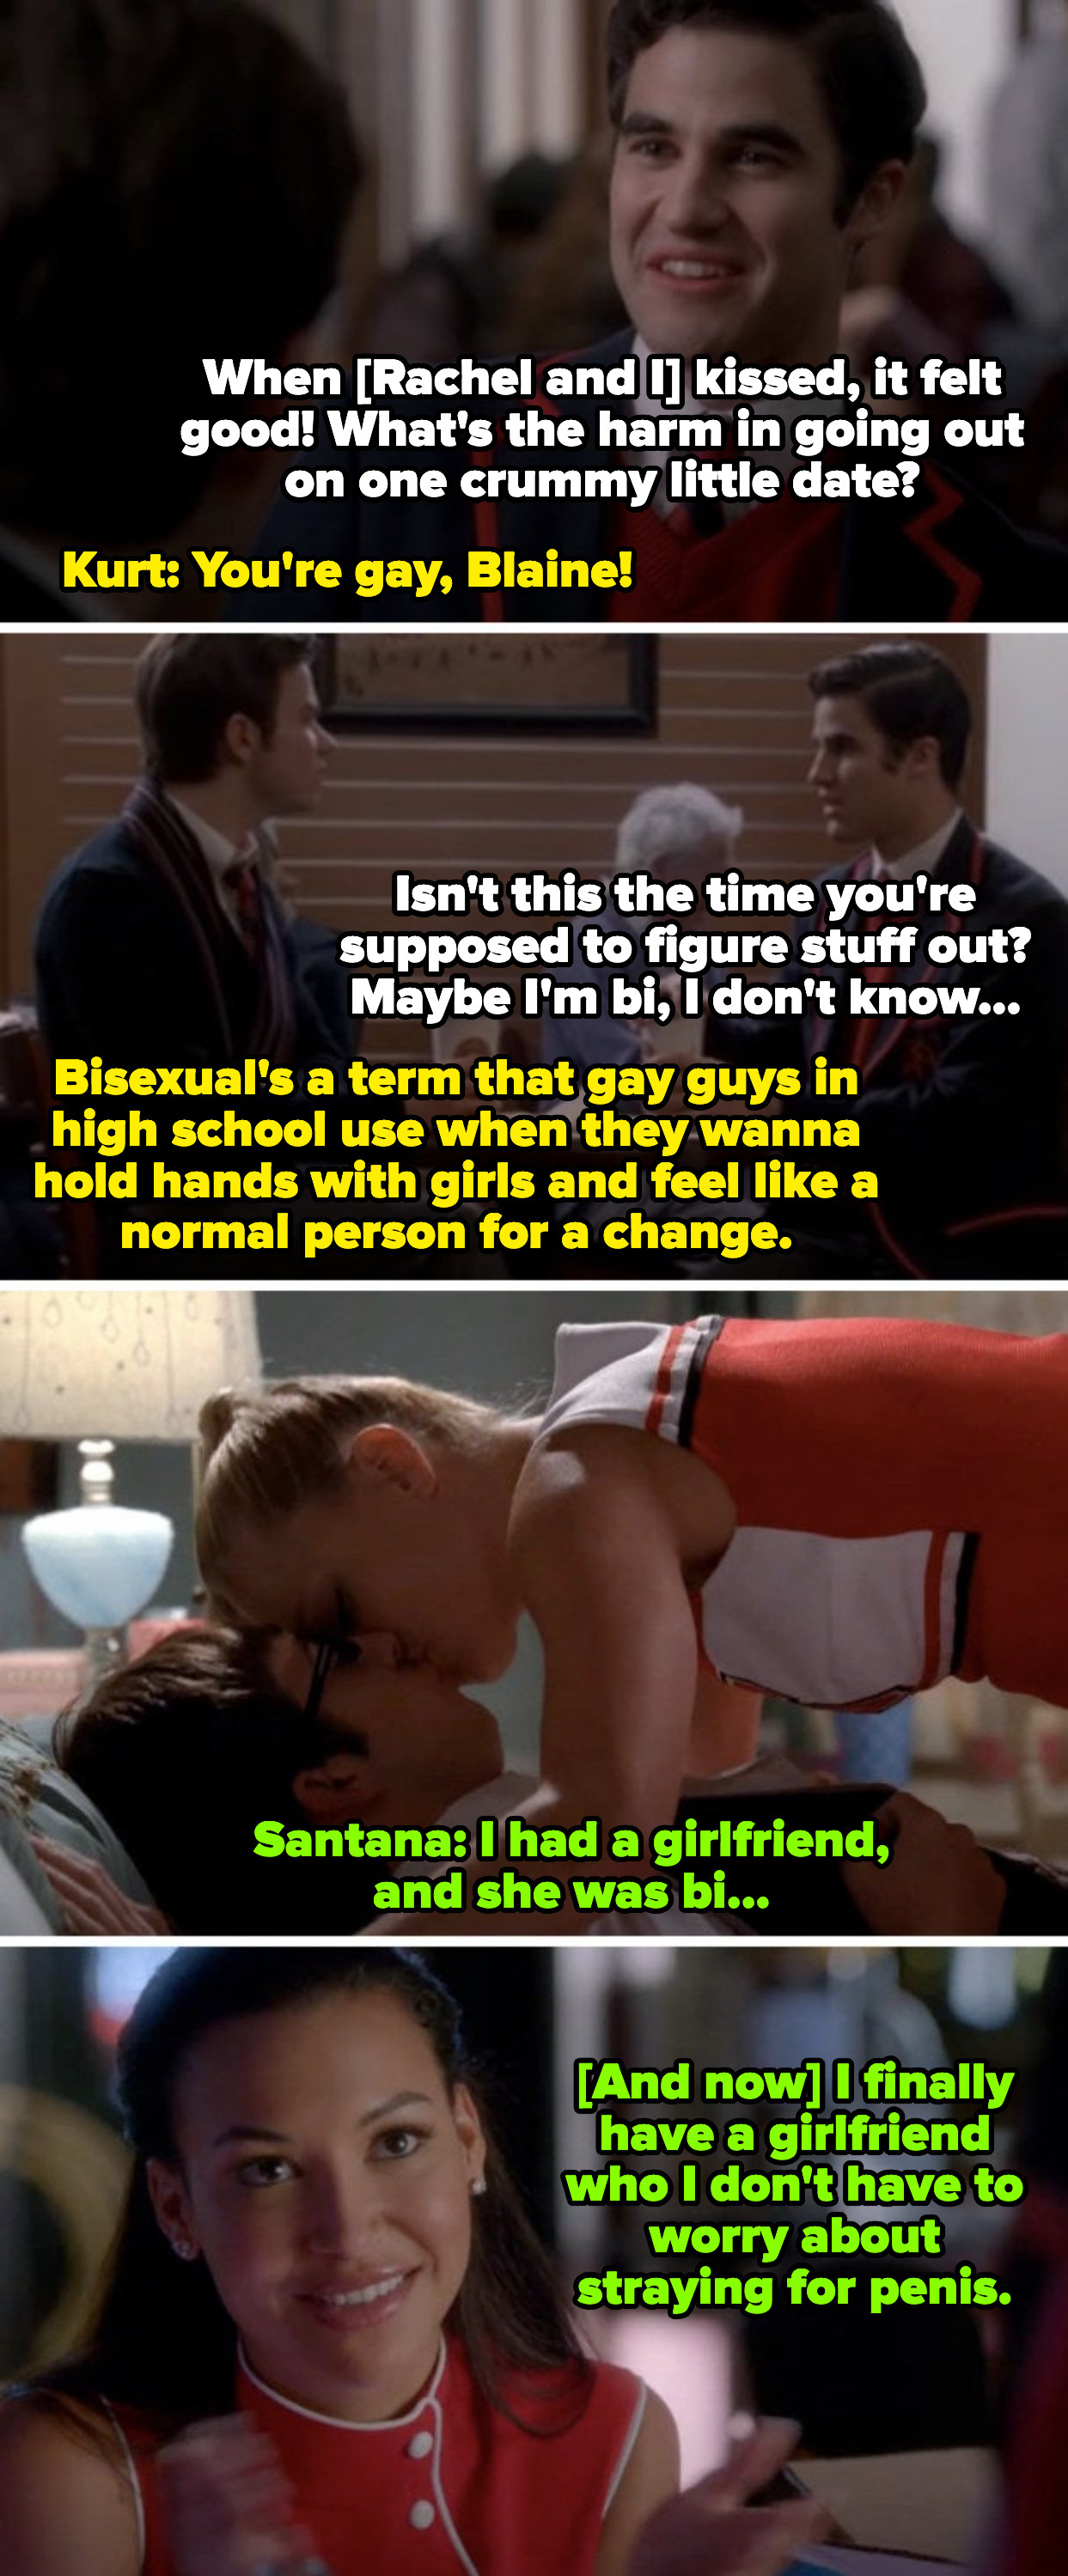 Kurt telling Blaine: &quot;Bisexual&#x27;s a term that gay guys use when they wanna hold hands with girls and feel like a normal person for a change.&quot; Santana telling Dani: &quot;I finally have a girlfriend who I don&#x27;t have to worry about straying for penis&quot;